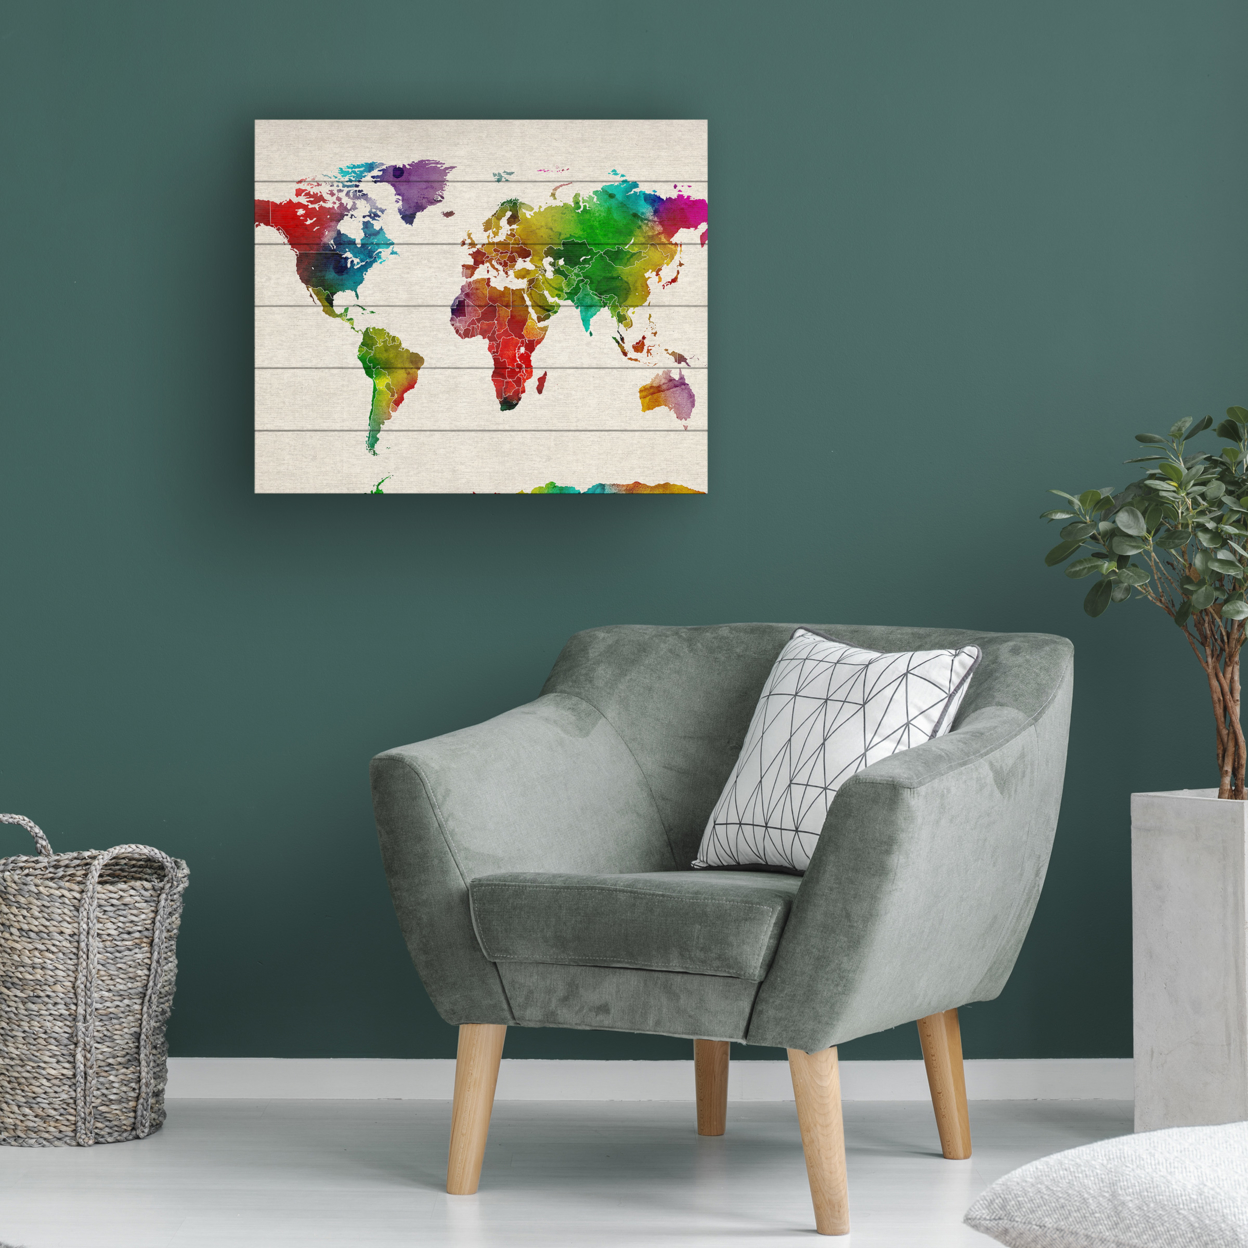 Wooden Slat Art 18 X 22 Inches Titled Watercolor World Map II Ready To Hang Home Decor Picture